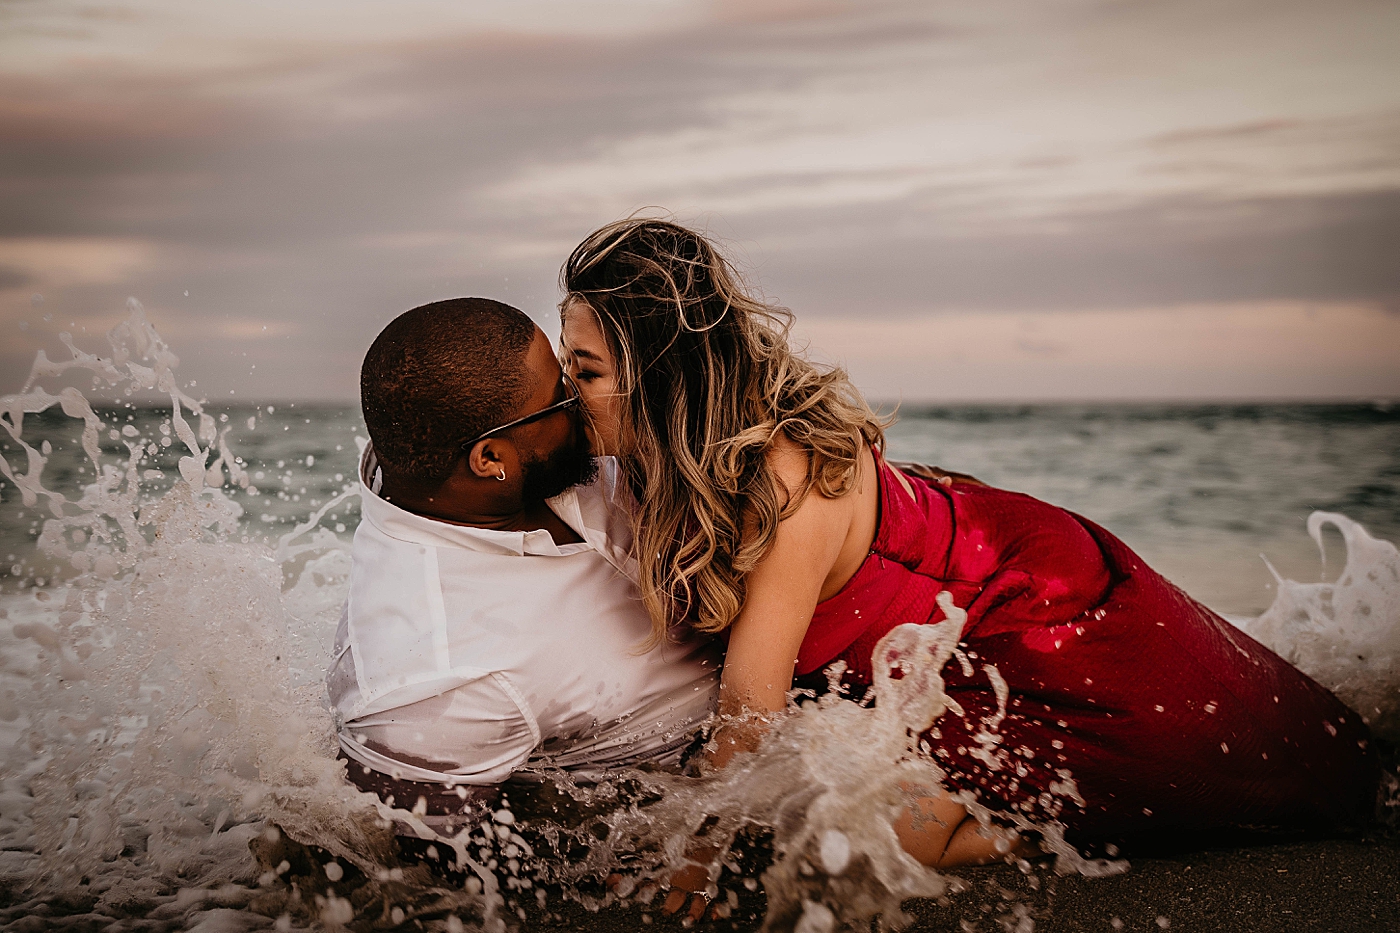 Wife on top of husband kissing in ocean water with waves crashing Palm Beach Anniversary Photography captured by South Florida Family Photographer Krystal Capone Photography